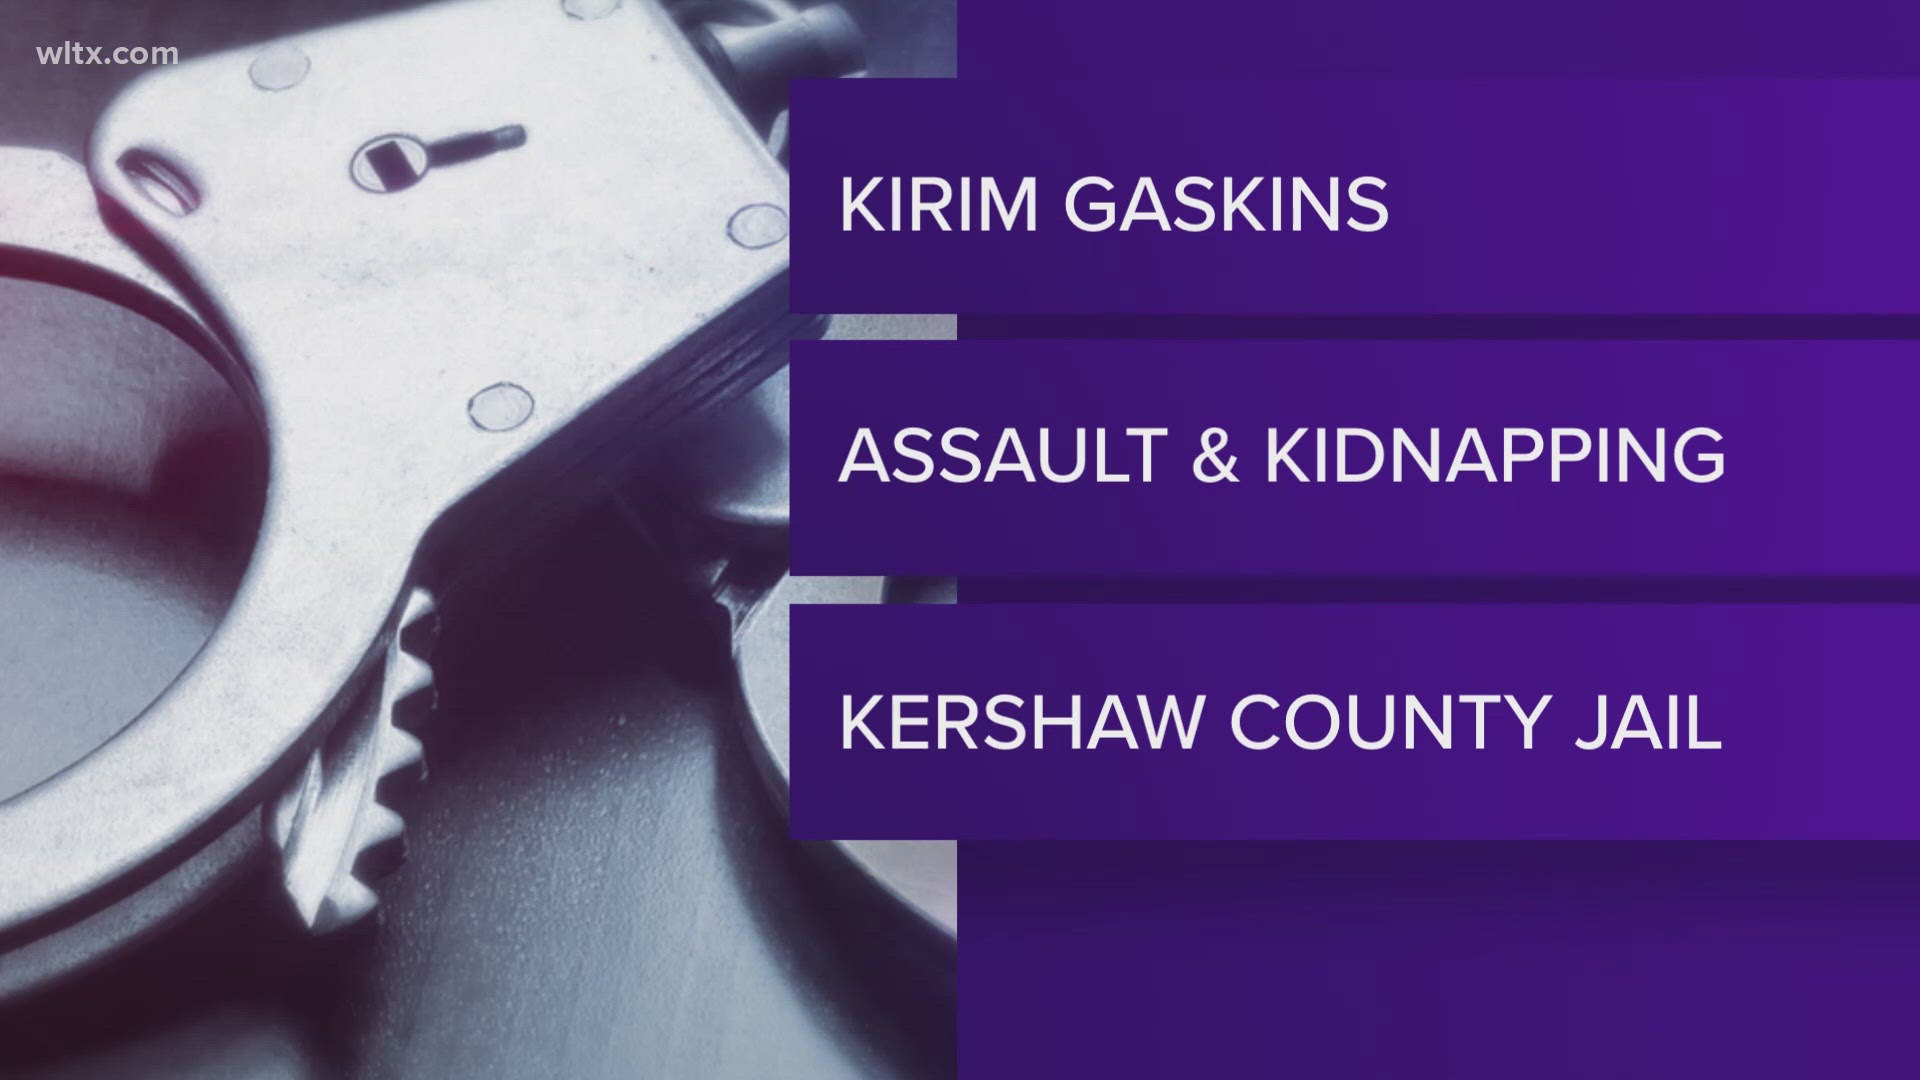 Kirim Gaskins has been charged with assault and kidnapping.